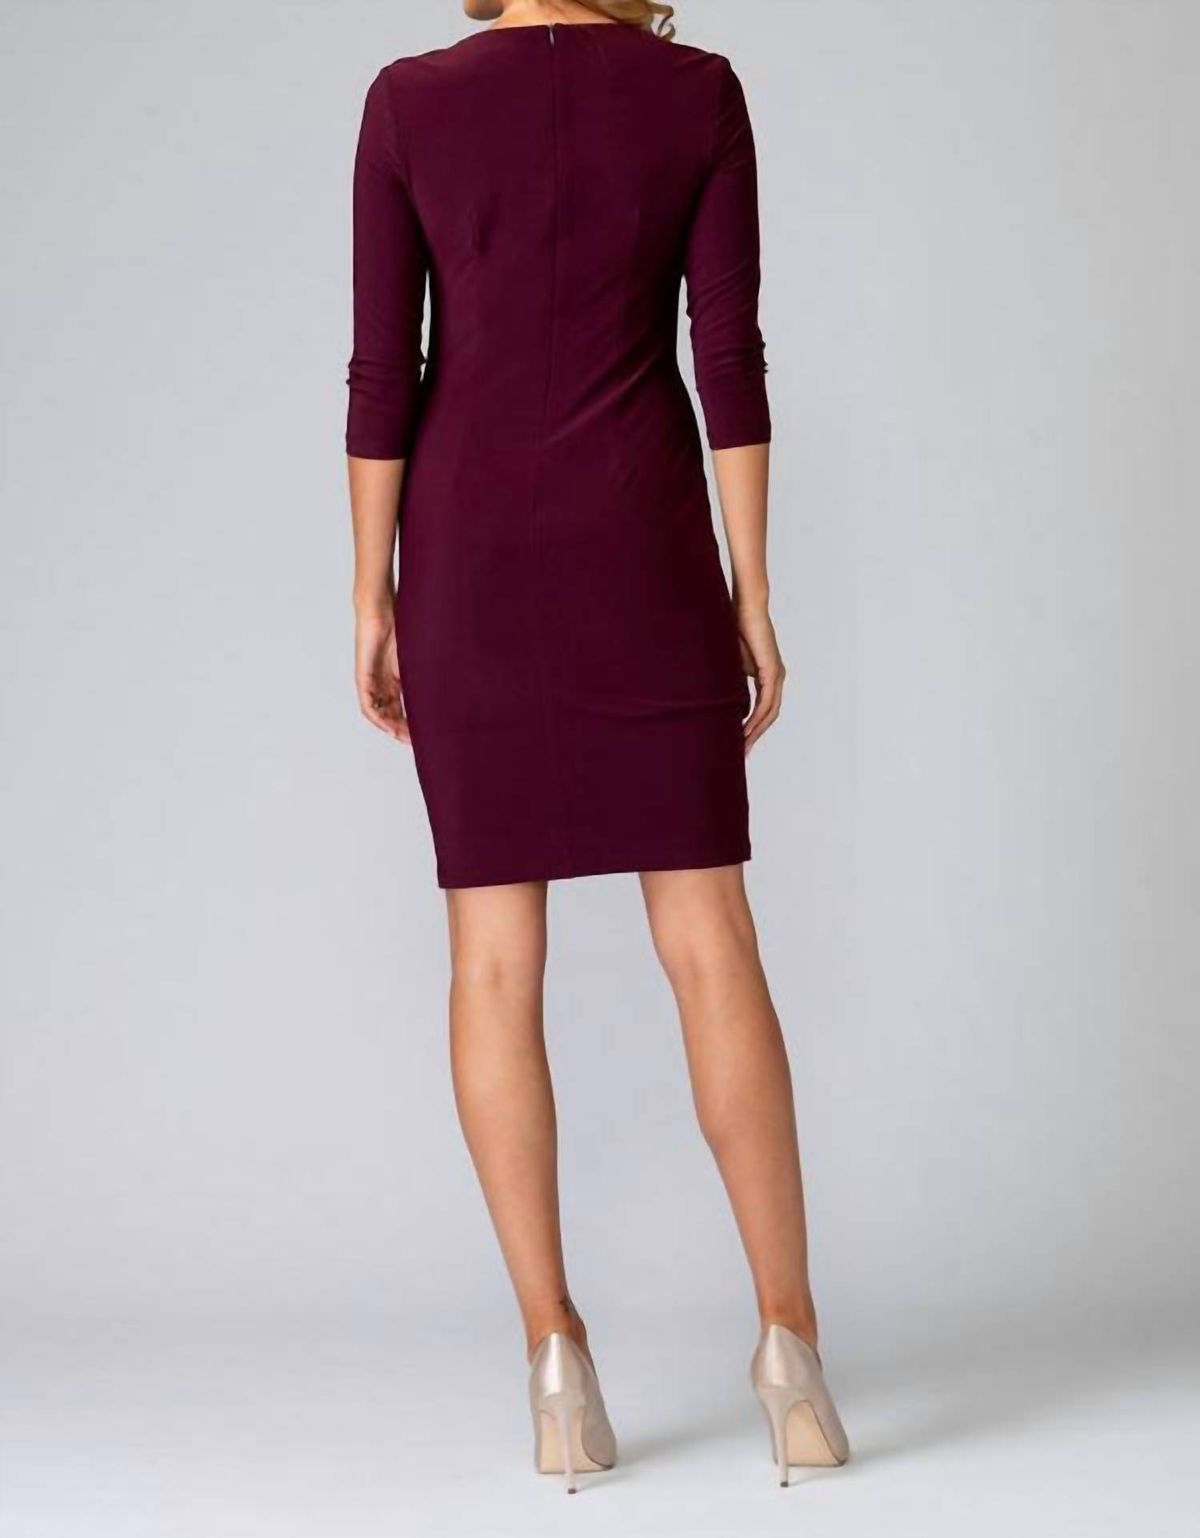 Style 1-2070958627-1901 Joseph Ribkoff Size 6 Burgundy Red Cocktail Dress on Queenly